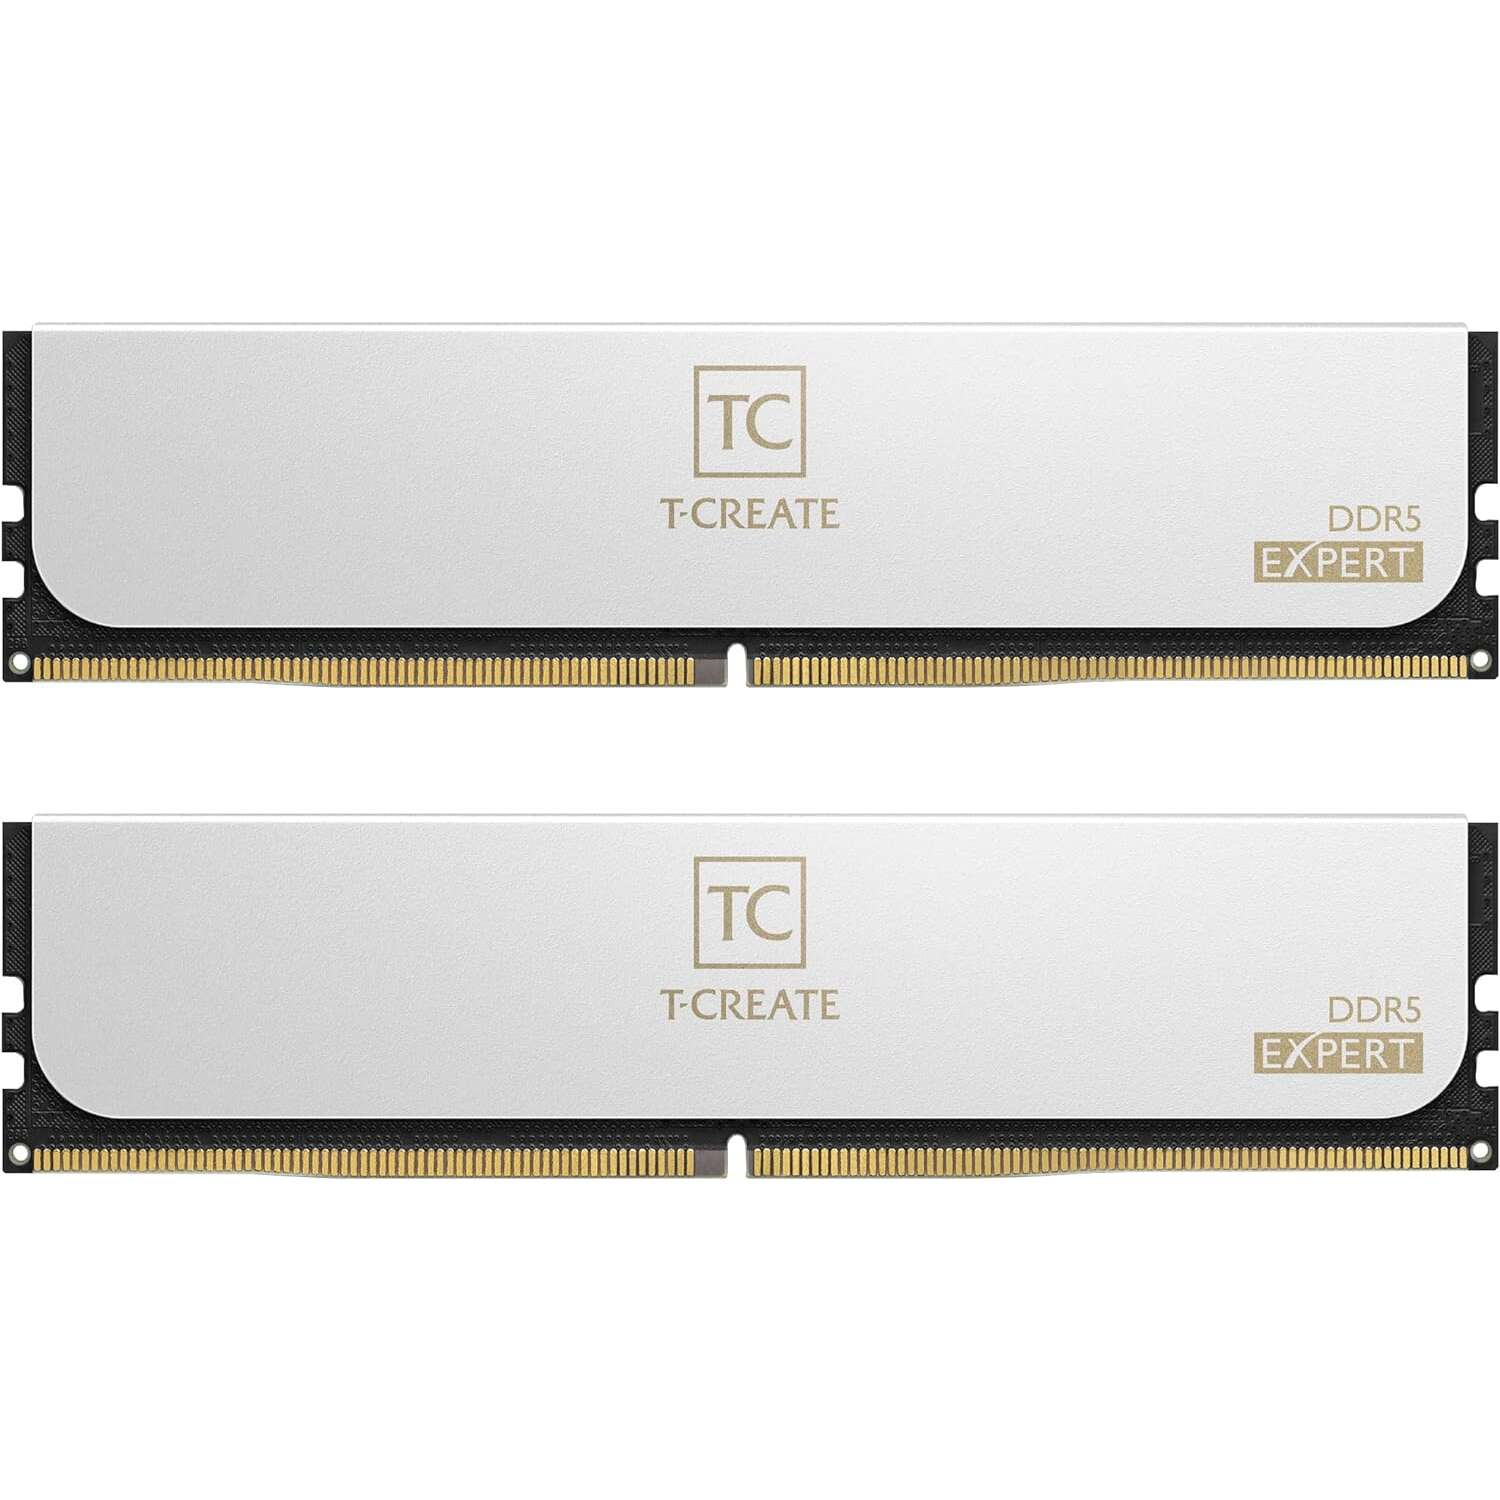 Teamgroup 32gb / 6400 t-create expert ddr5 ram kit (2x16gb) - feh...